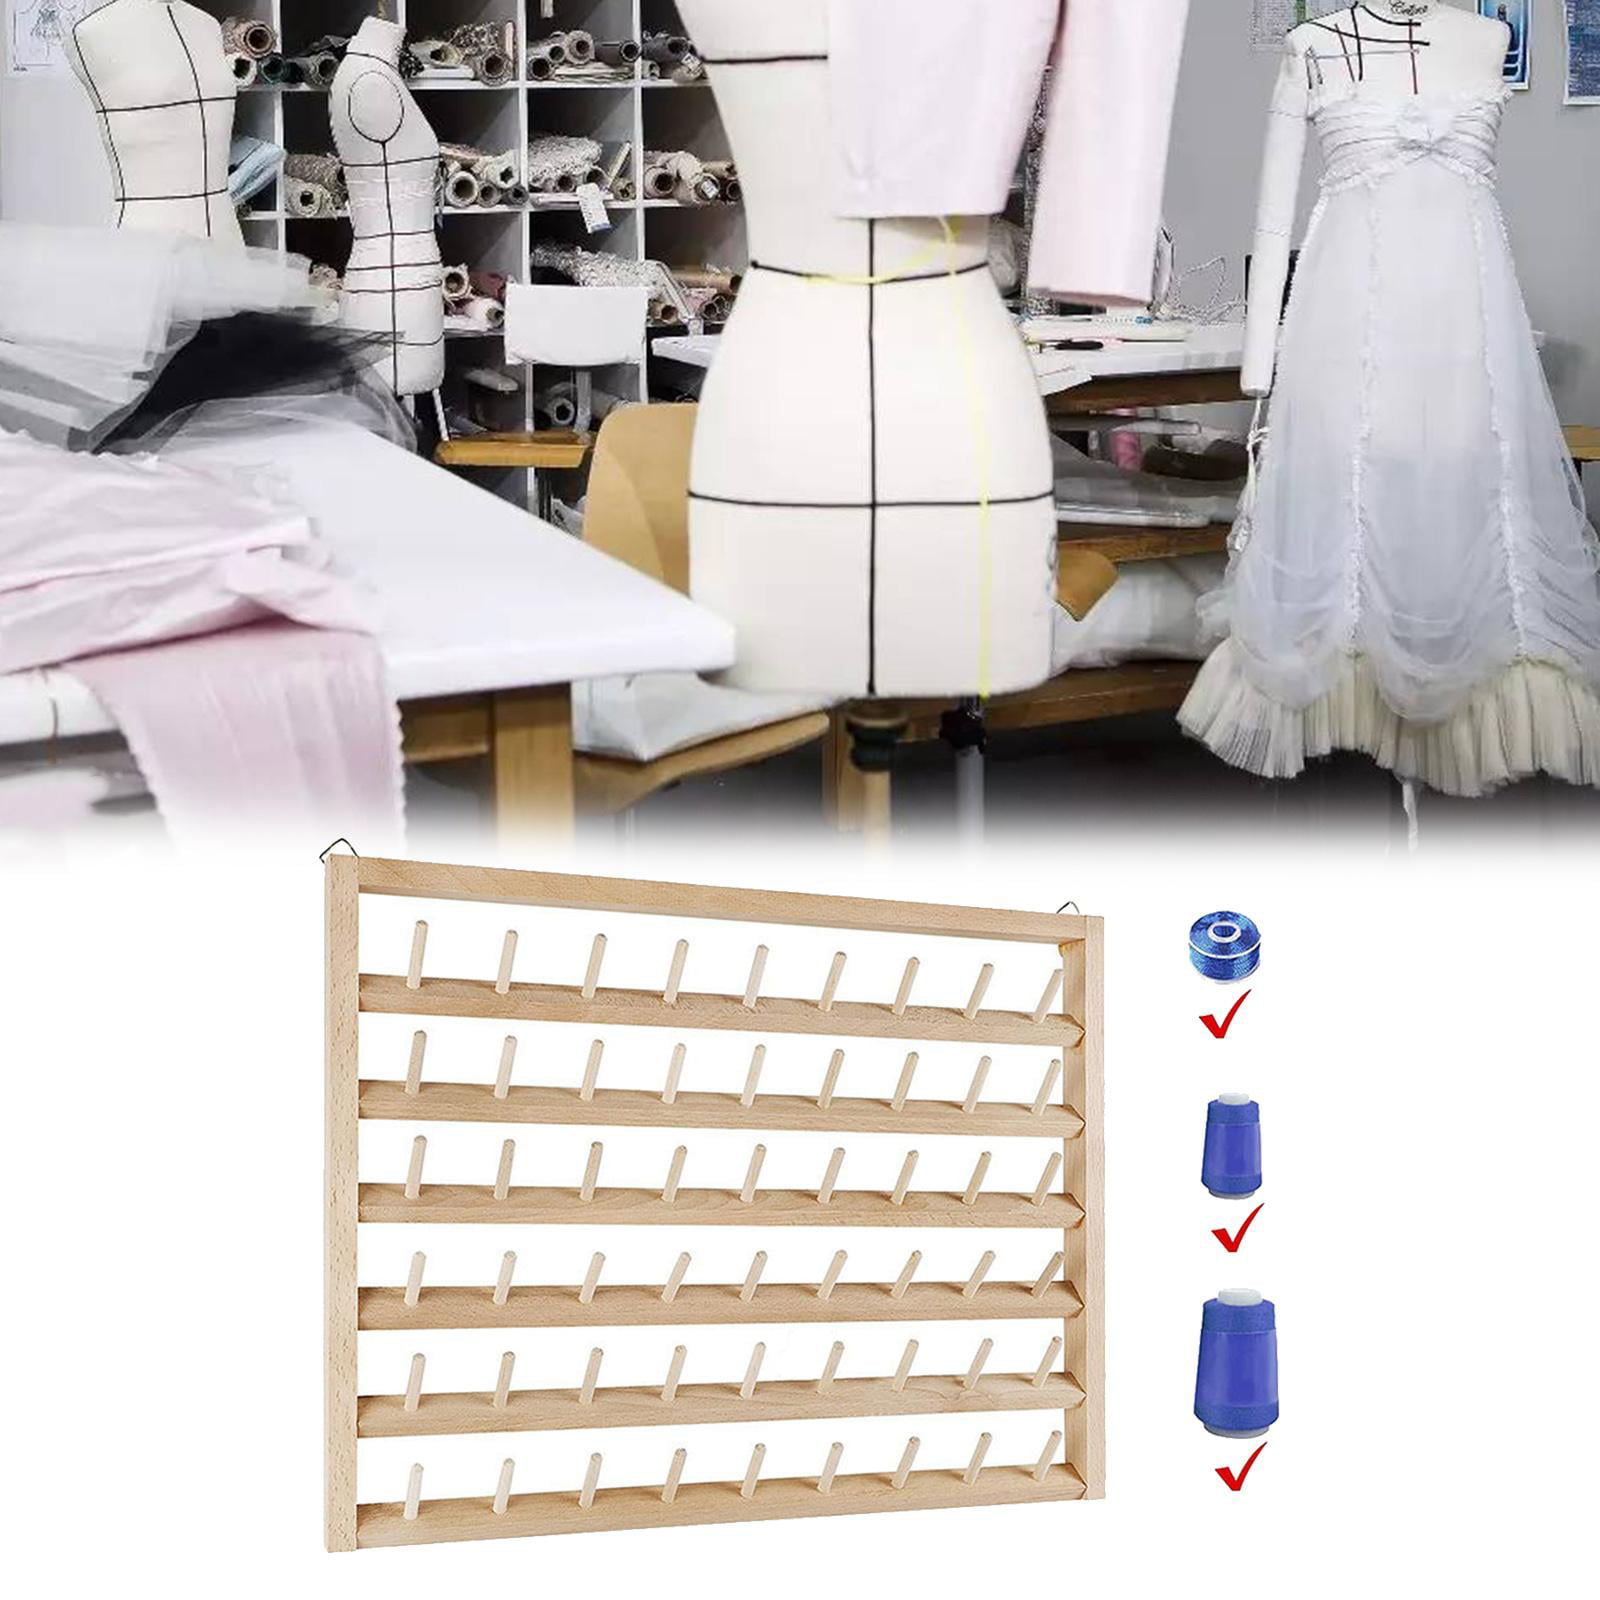  Thread Holder Wall Mount 54 Spools Sewing Thread Rack  Embroidery Thread Organizer Rack Sewing Thread Holder White with Hanging  Tools for Quilting Braiding Hair Metal 2 Pack